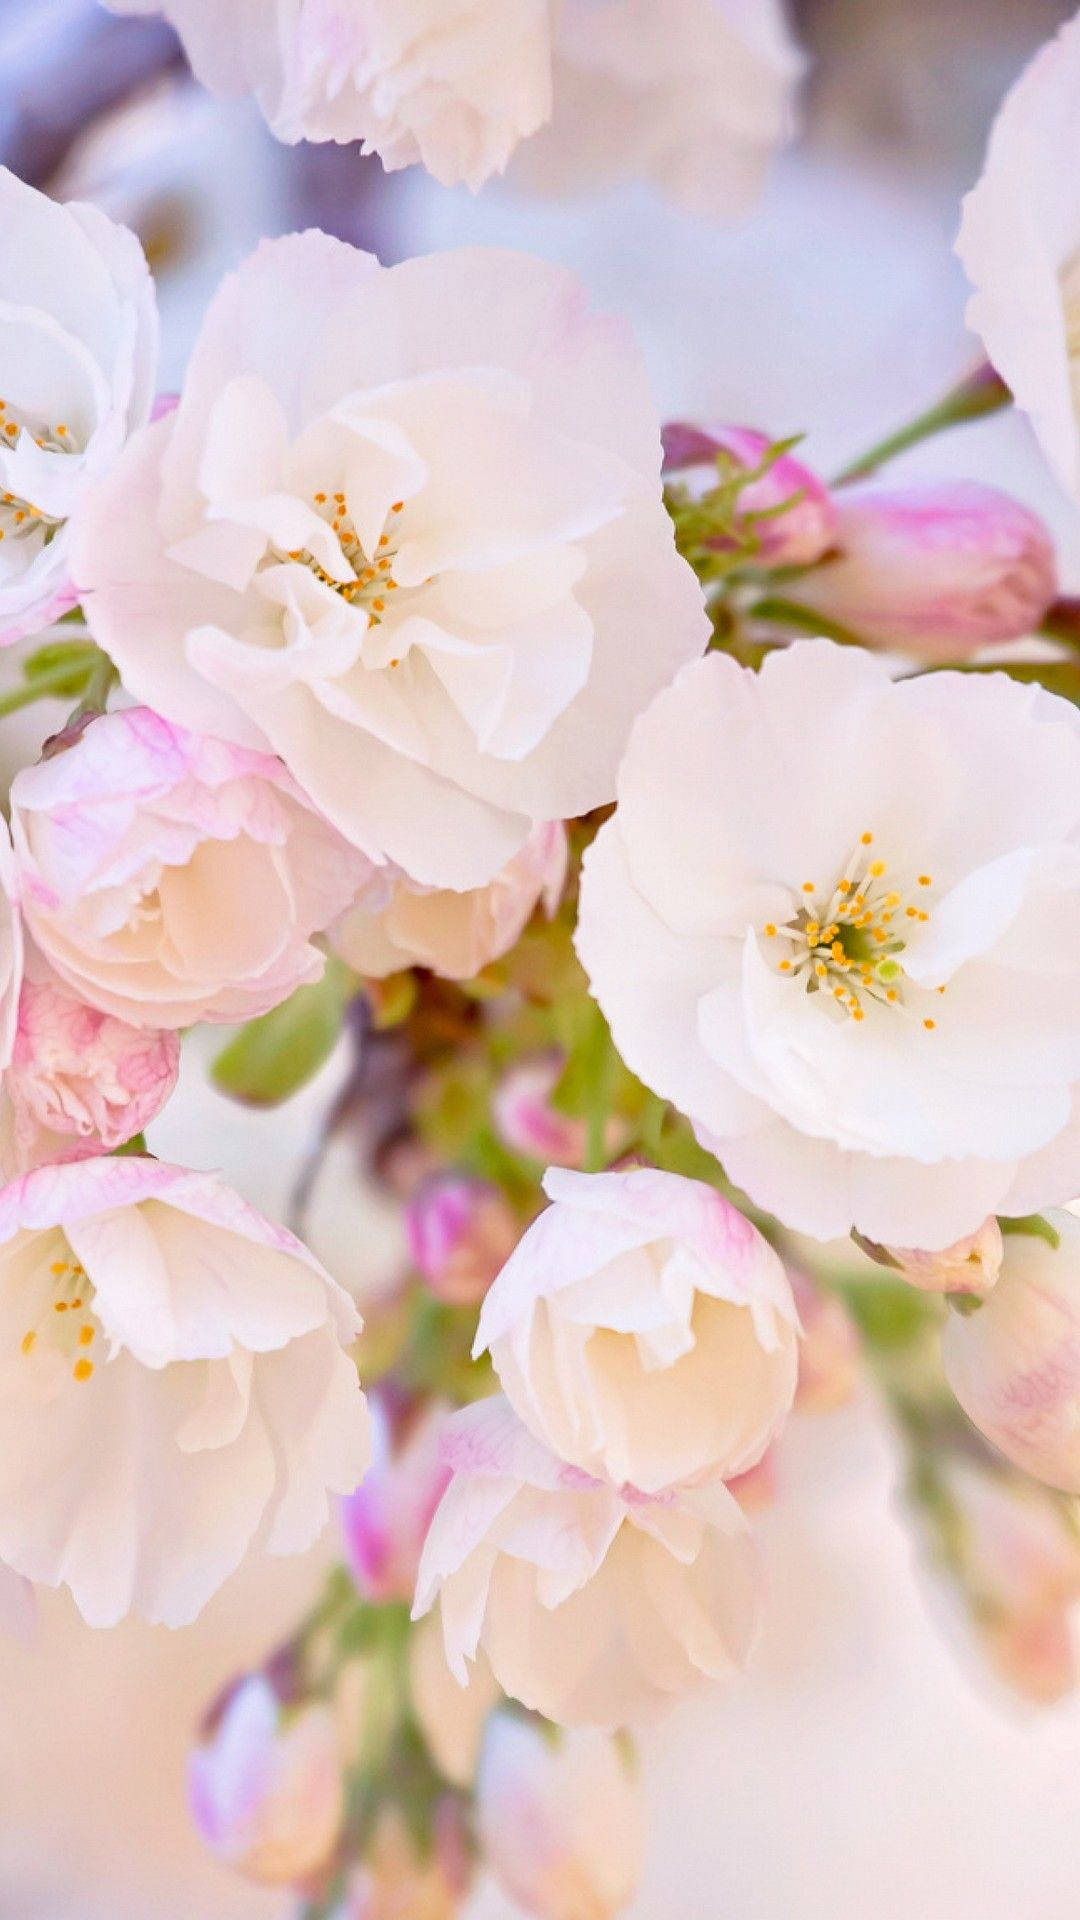 Capture the Beauty of Spring with an iPhone Wallpaper